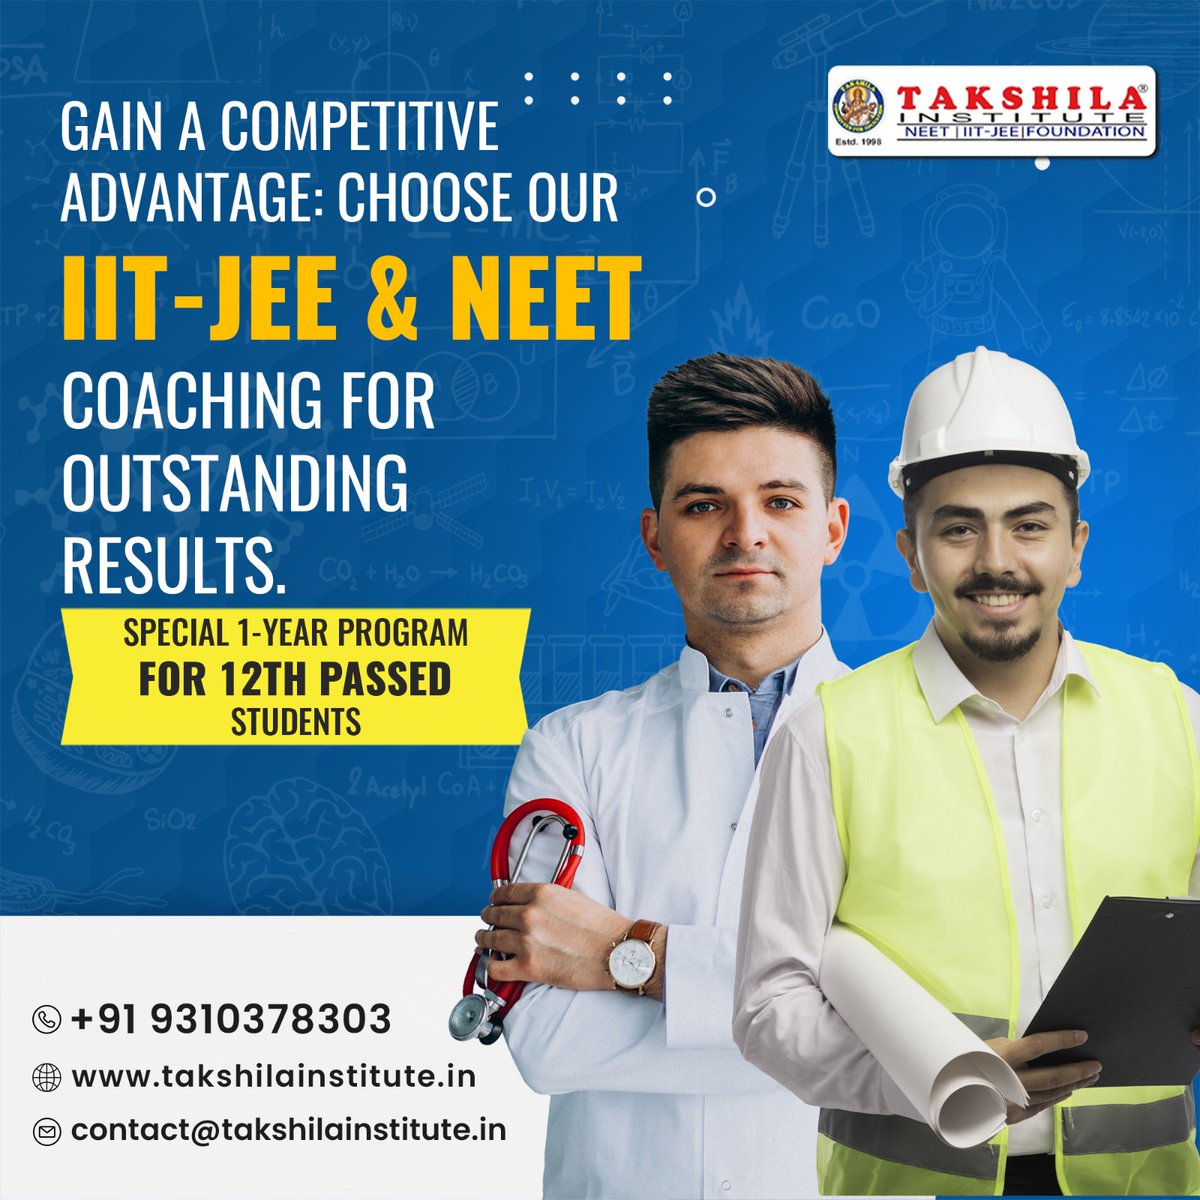 Seize the competitive advantage: Elevate your performance and achieve exceptional results with our acclaimed IIT-JEE and NEET coaching.

#competitiveadvantage #elevateyourperformance #exceptionalresults #iitjeecoaching #neetcoaching #takshila #takshilainstitute